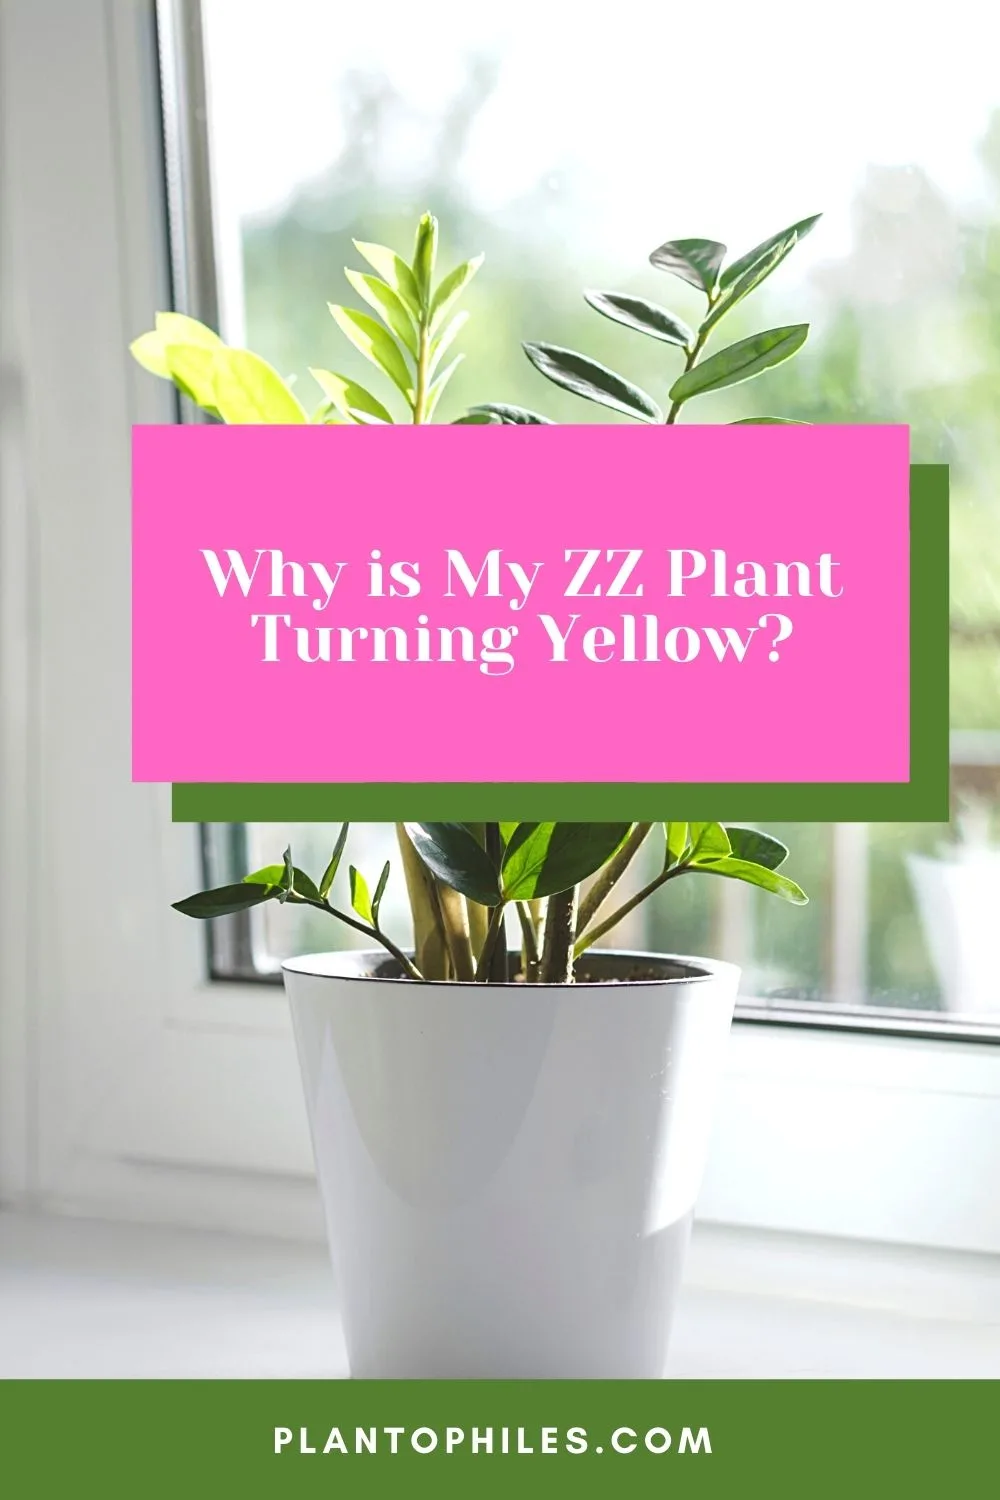 Why is My ZZ plant Turning Yellow